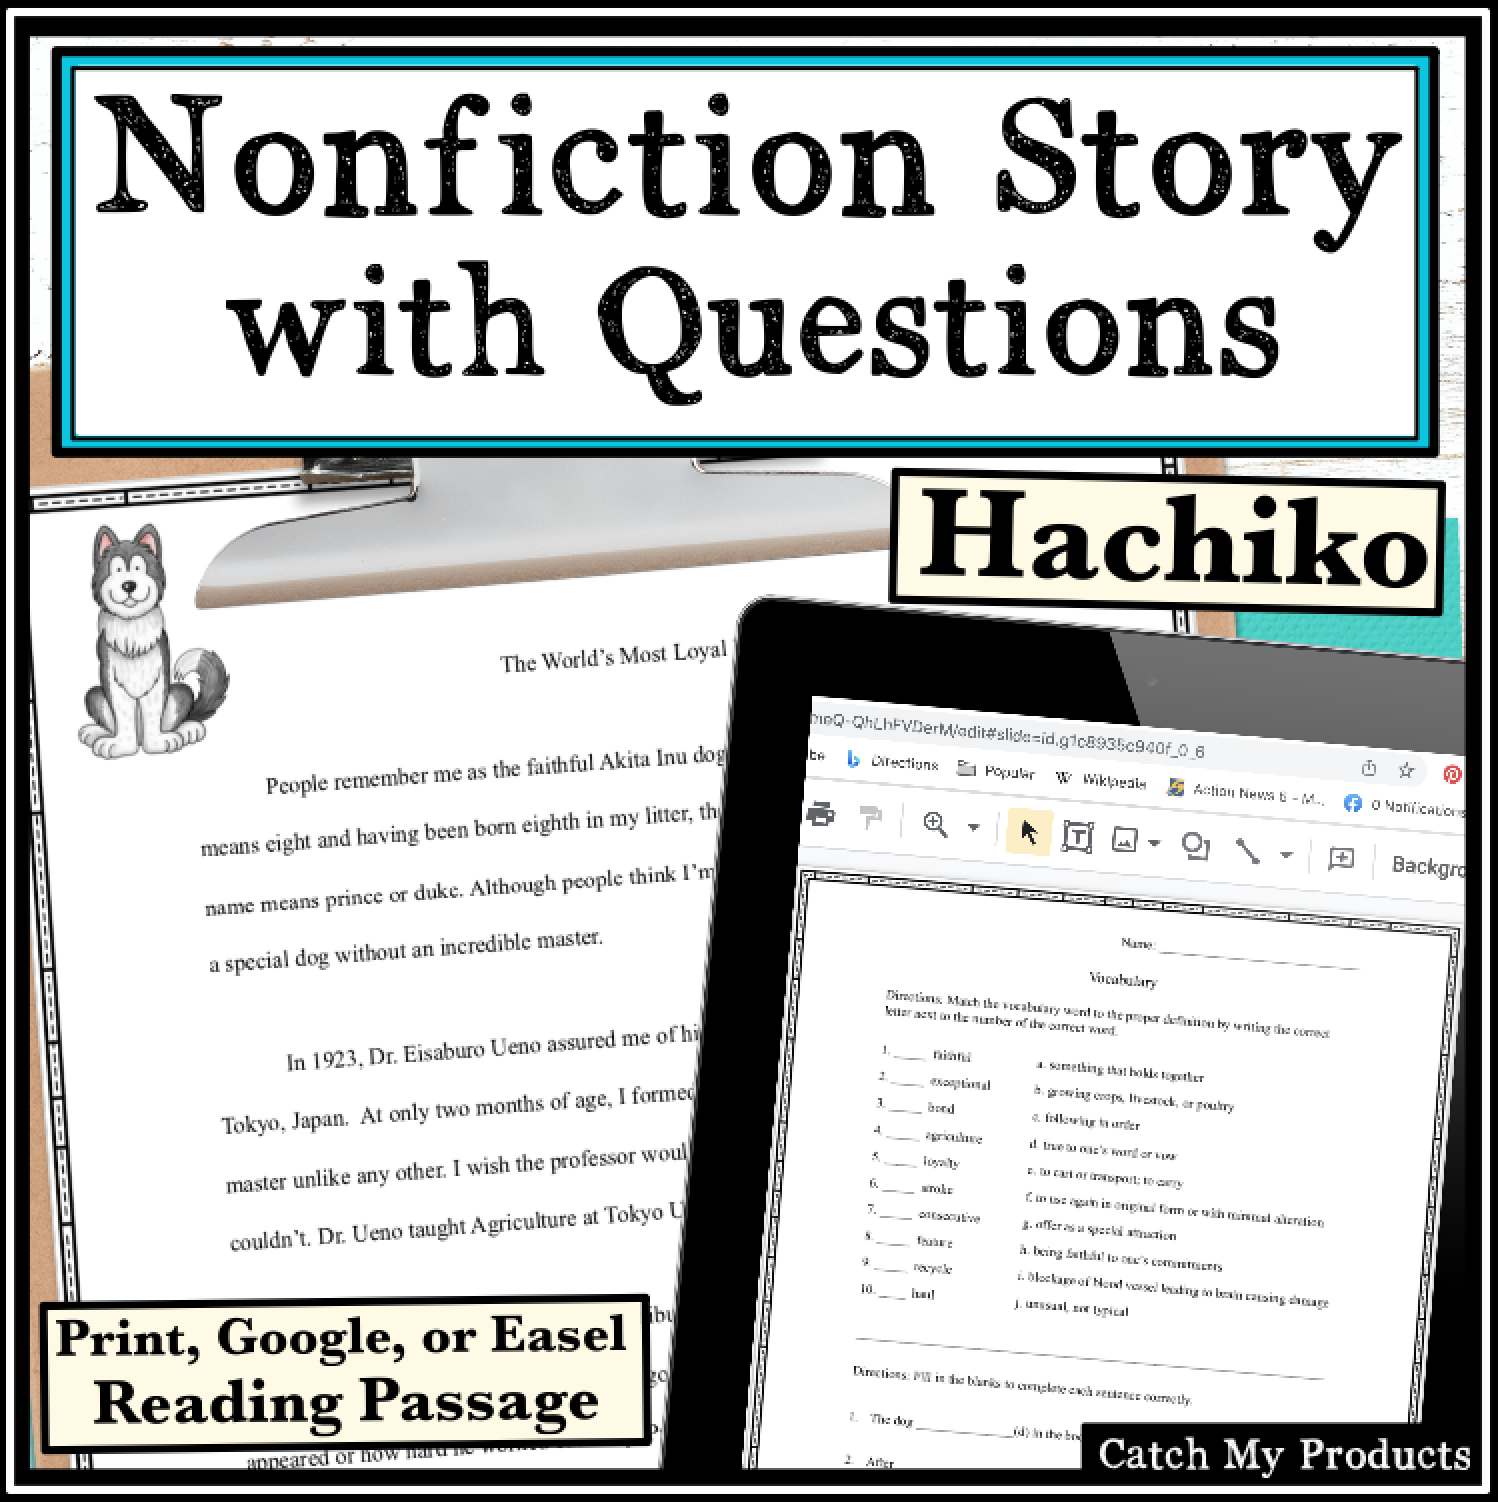 Hachiko Nonfiction Reading Passage with Questions